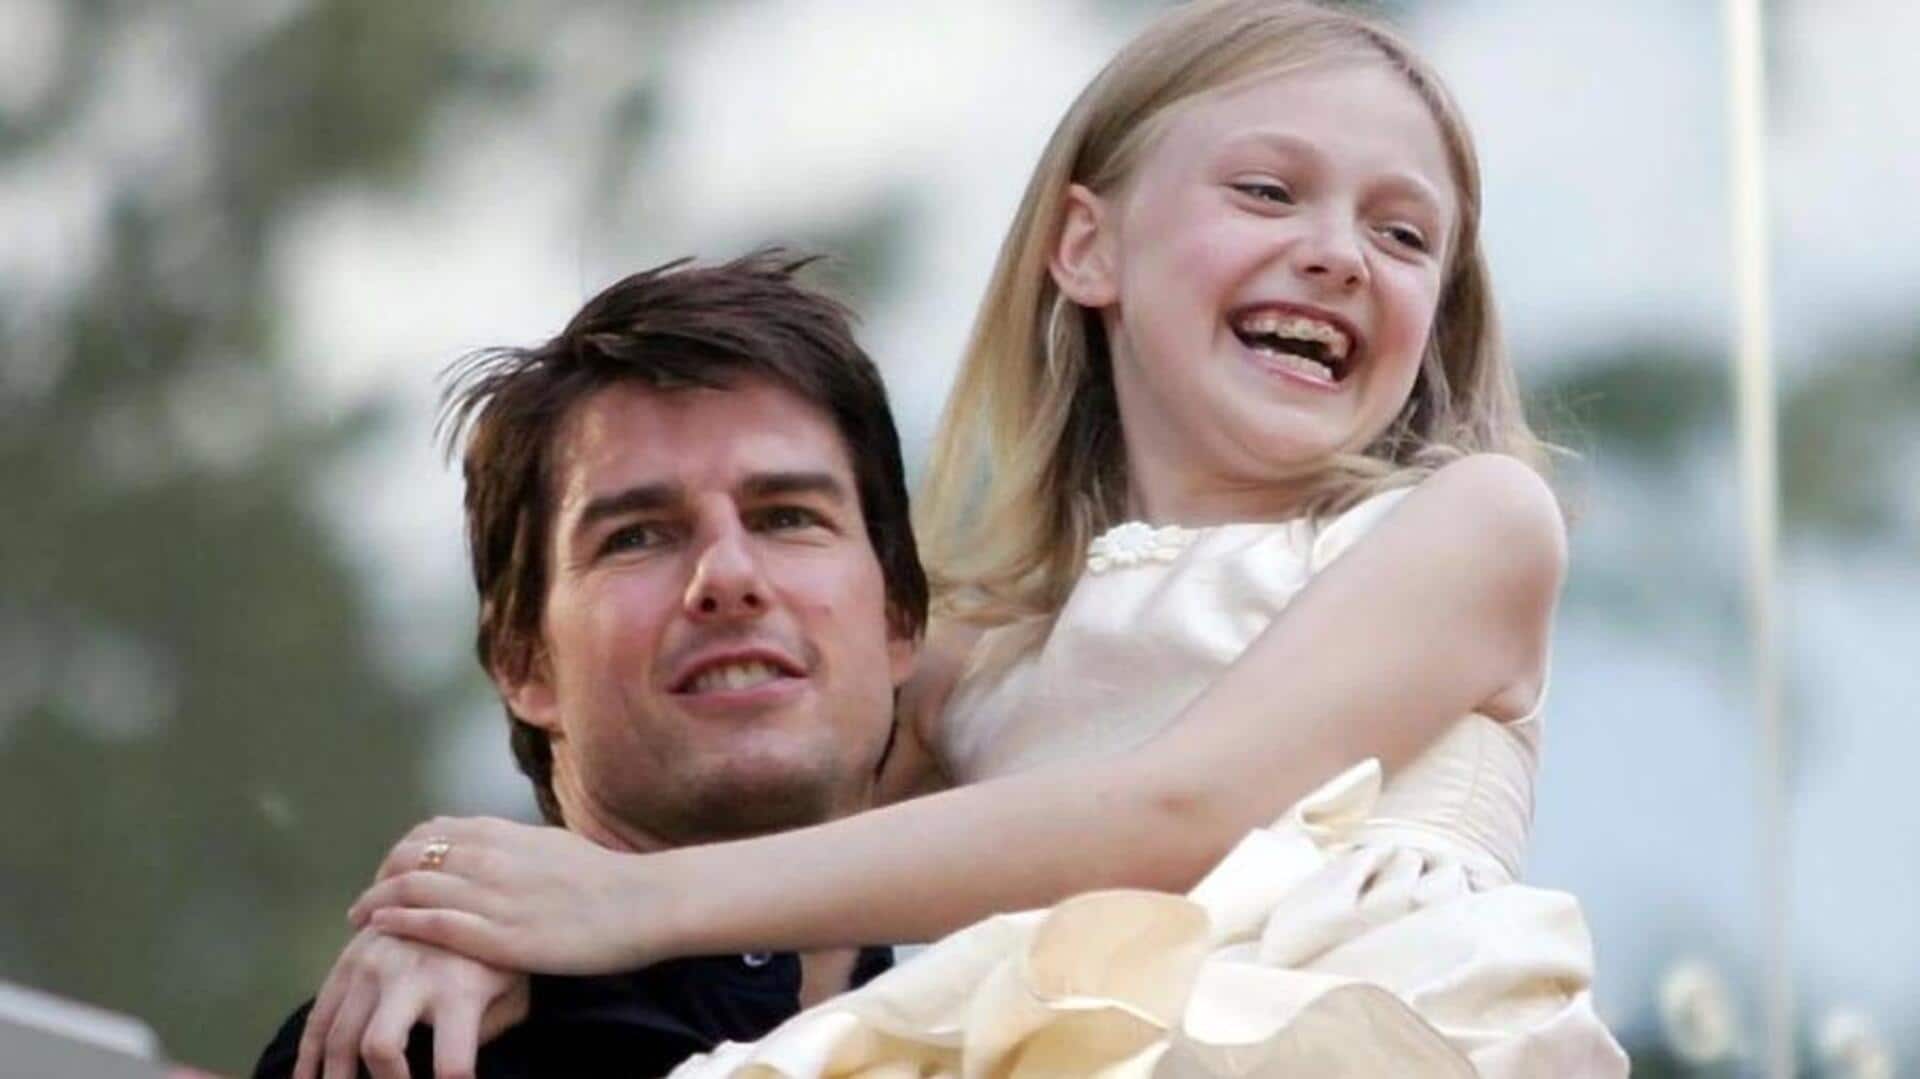 Know why Tom Cruise gifts Dakota Fanning shoes every year